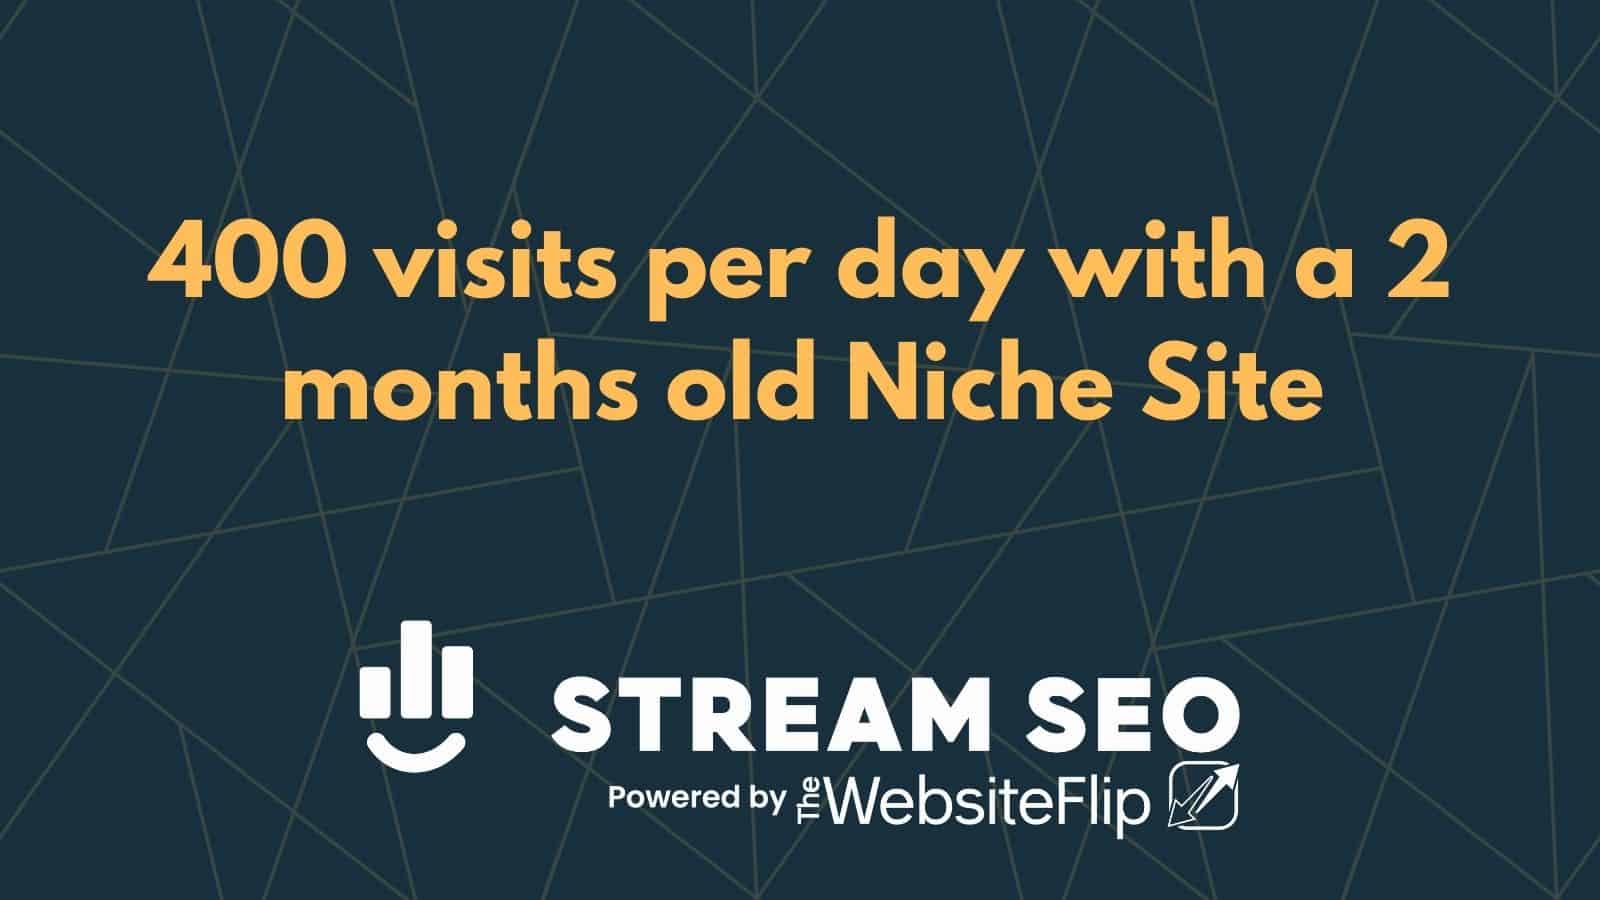 400 visits per day with a 2 months old Niche Site